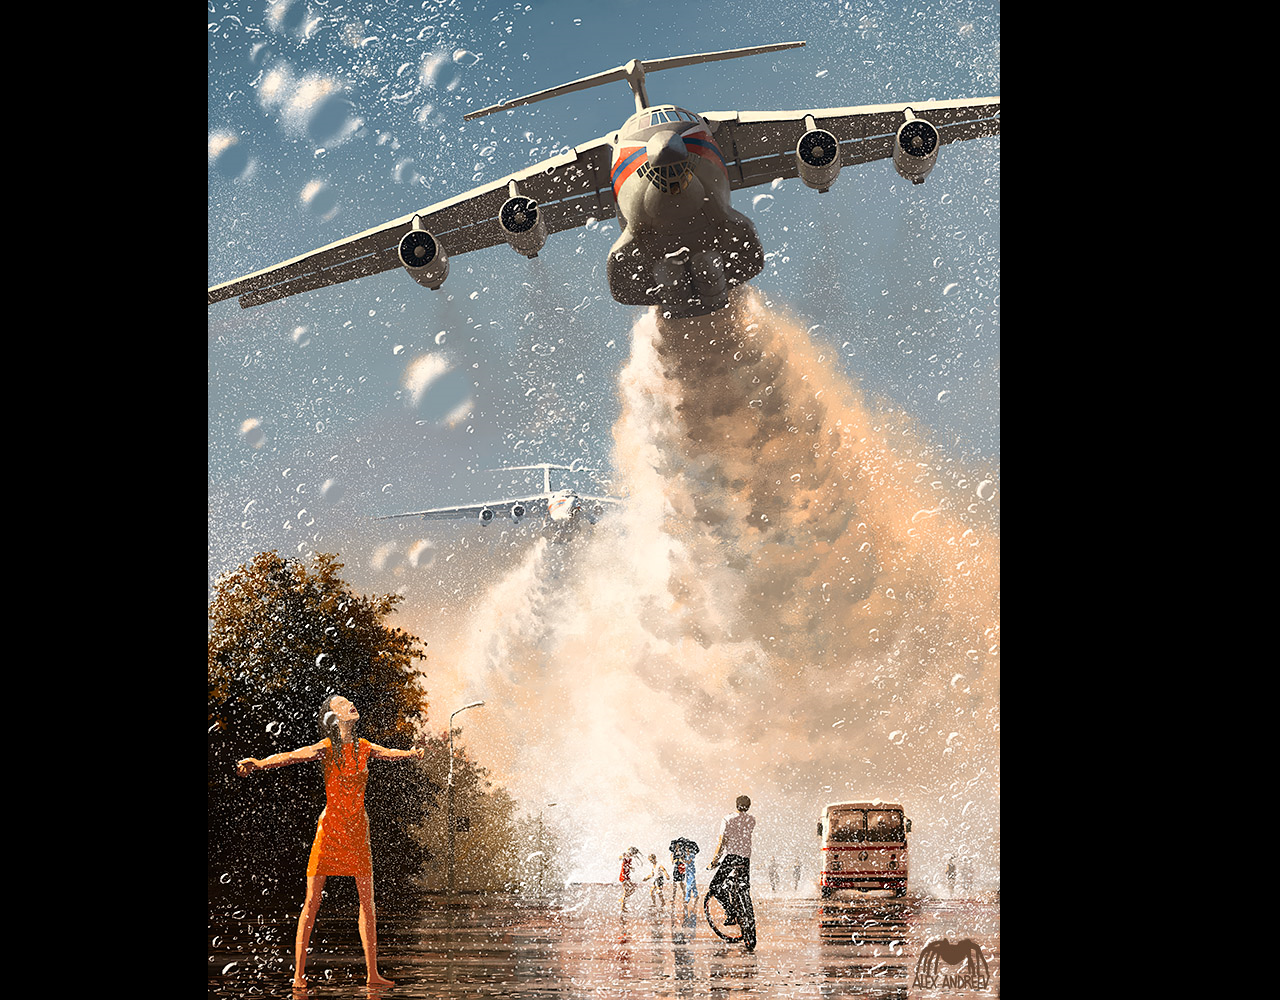 General 1280x1000 airplane Russia water rain street happy Alexey Andreev Il-76 Soviet wing Russian/Soviet aircraft Ilyushin flying sky reflection water drops